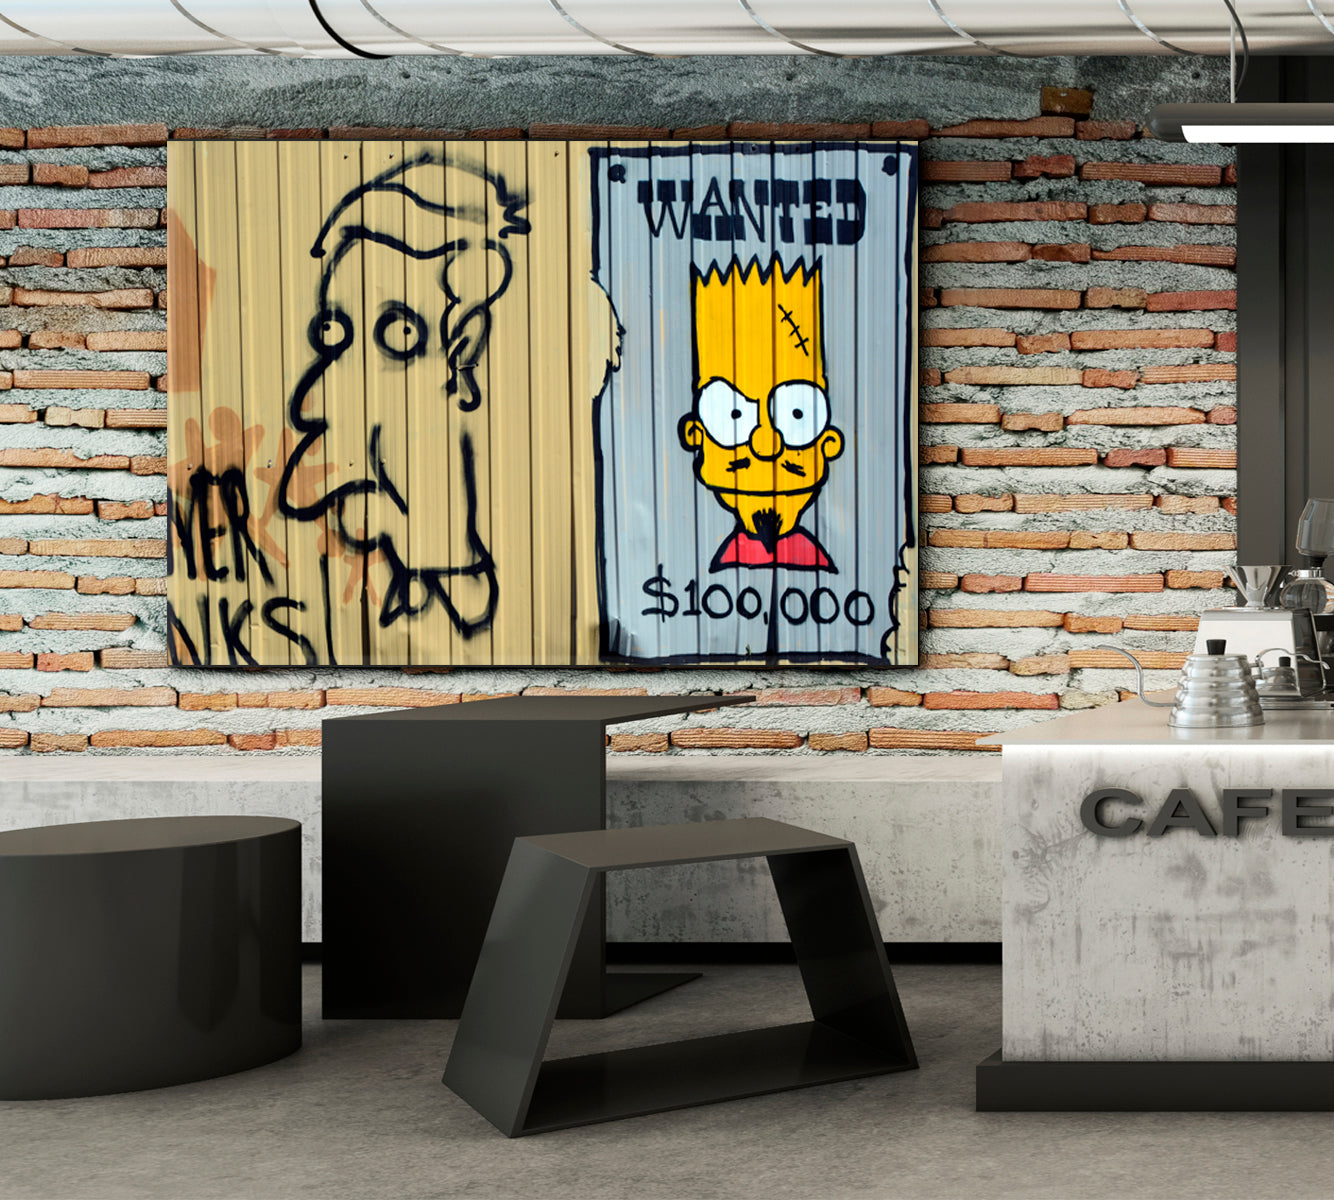 LOOKING FOR A STREET ART Urban Graffiti Bart Simpson Wanted! Montreal Canada Whimsical Canvas Print Street Art Canvas Print Artesty 1 panel 24" x 16" 